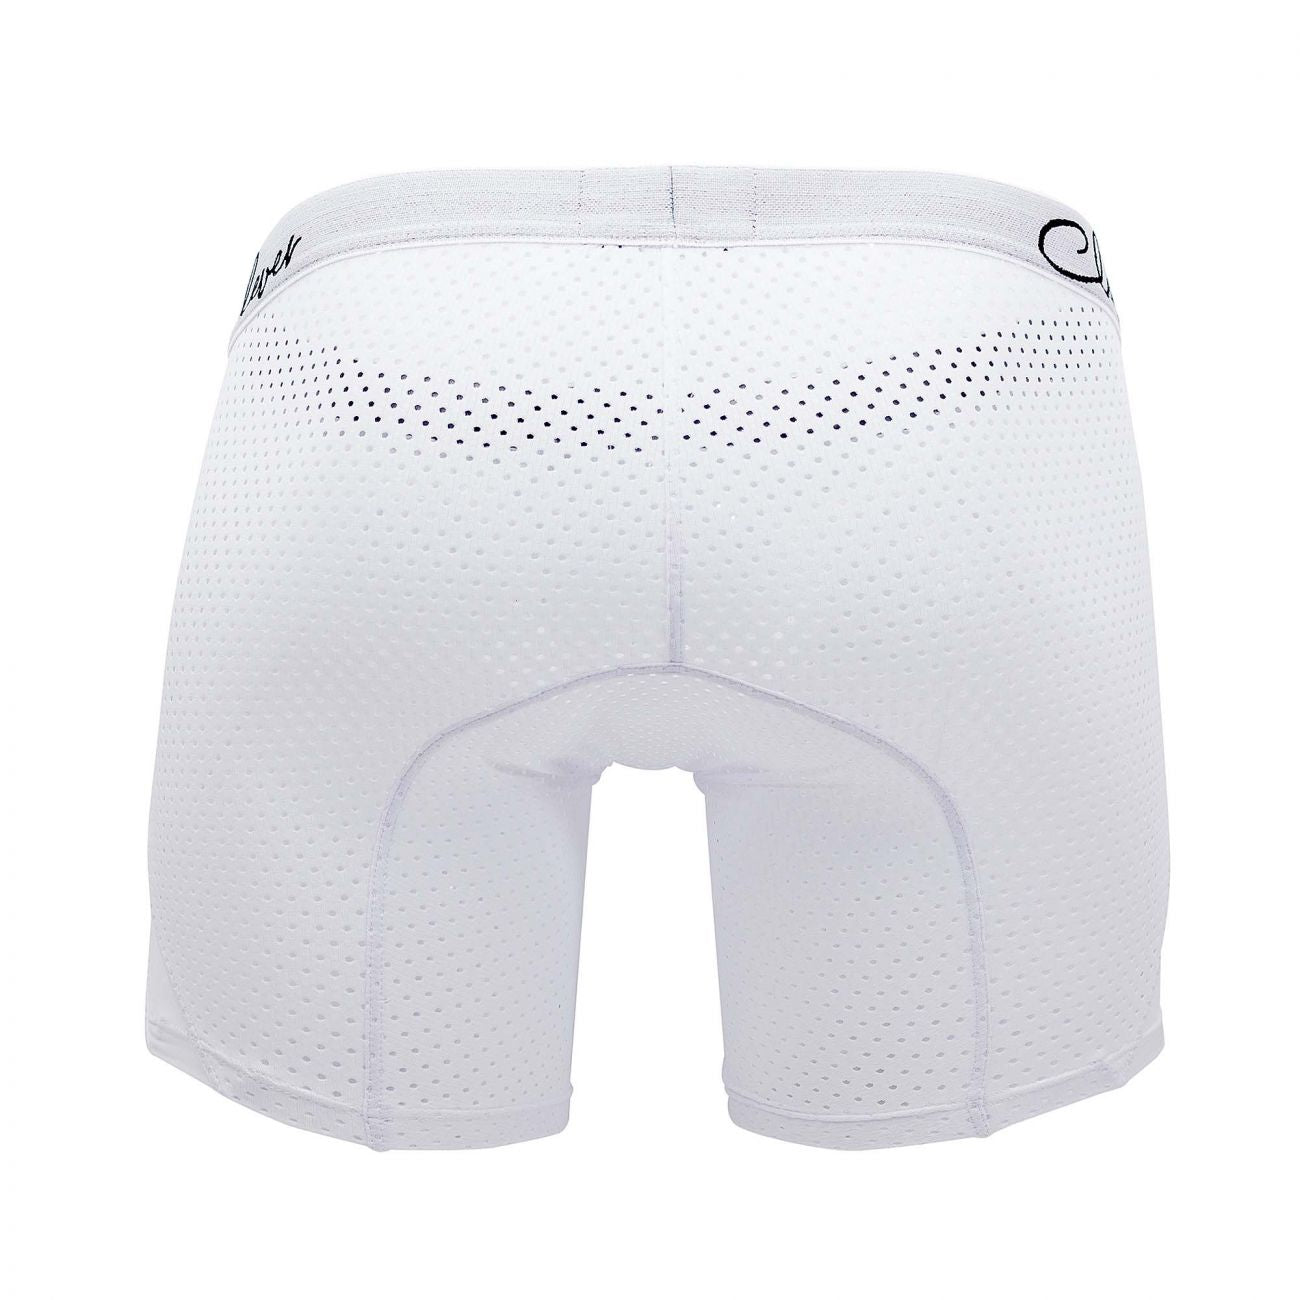 Clever 0366 Time Boxer Briefs White